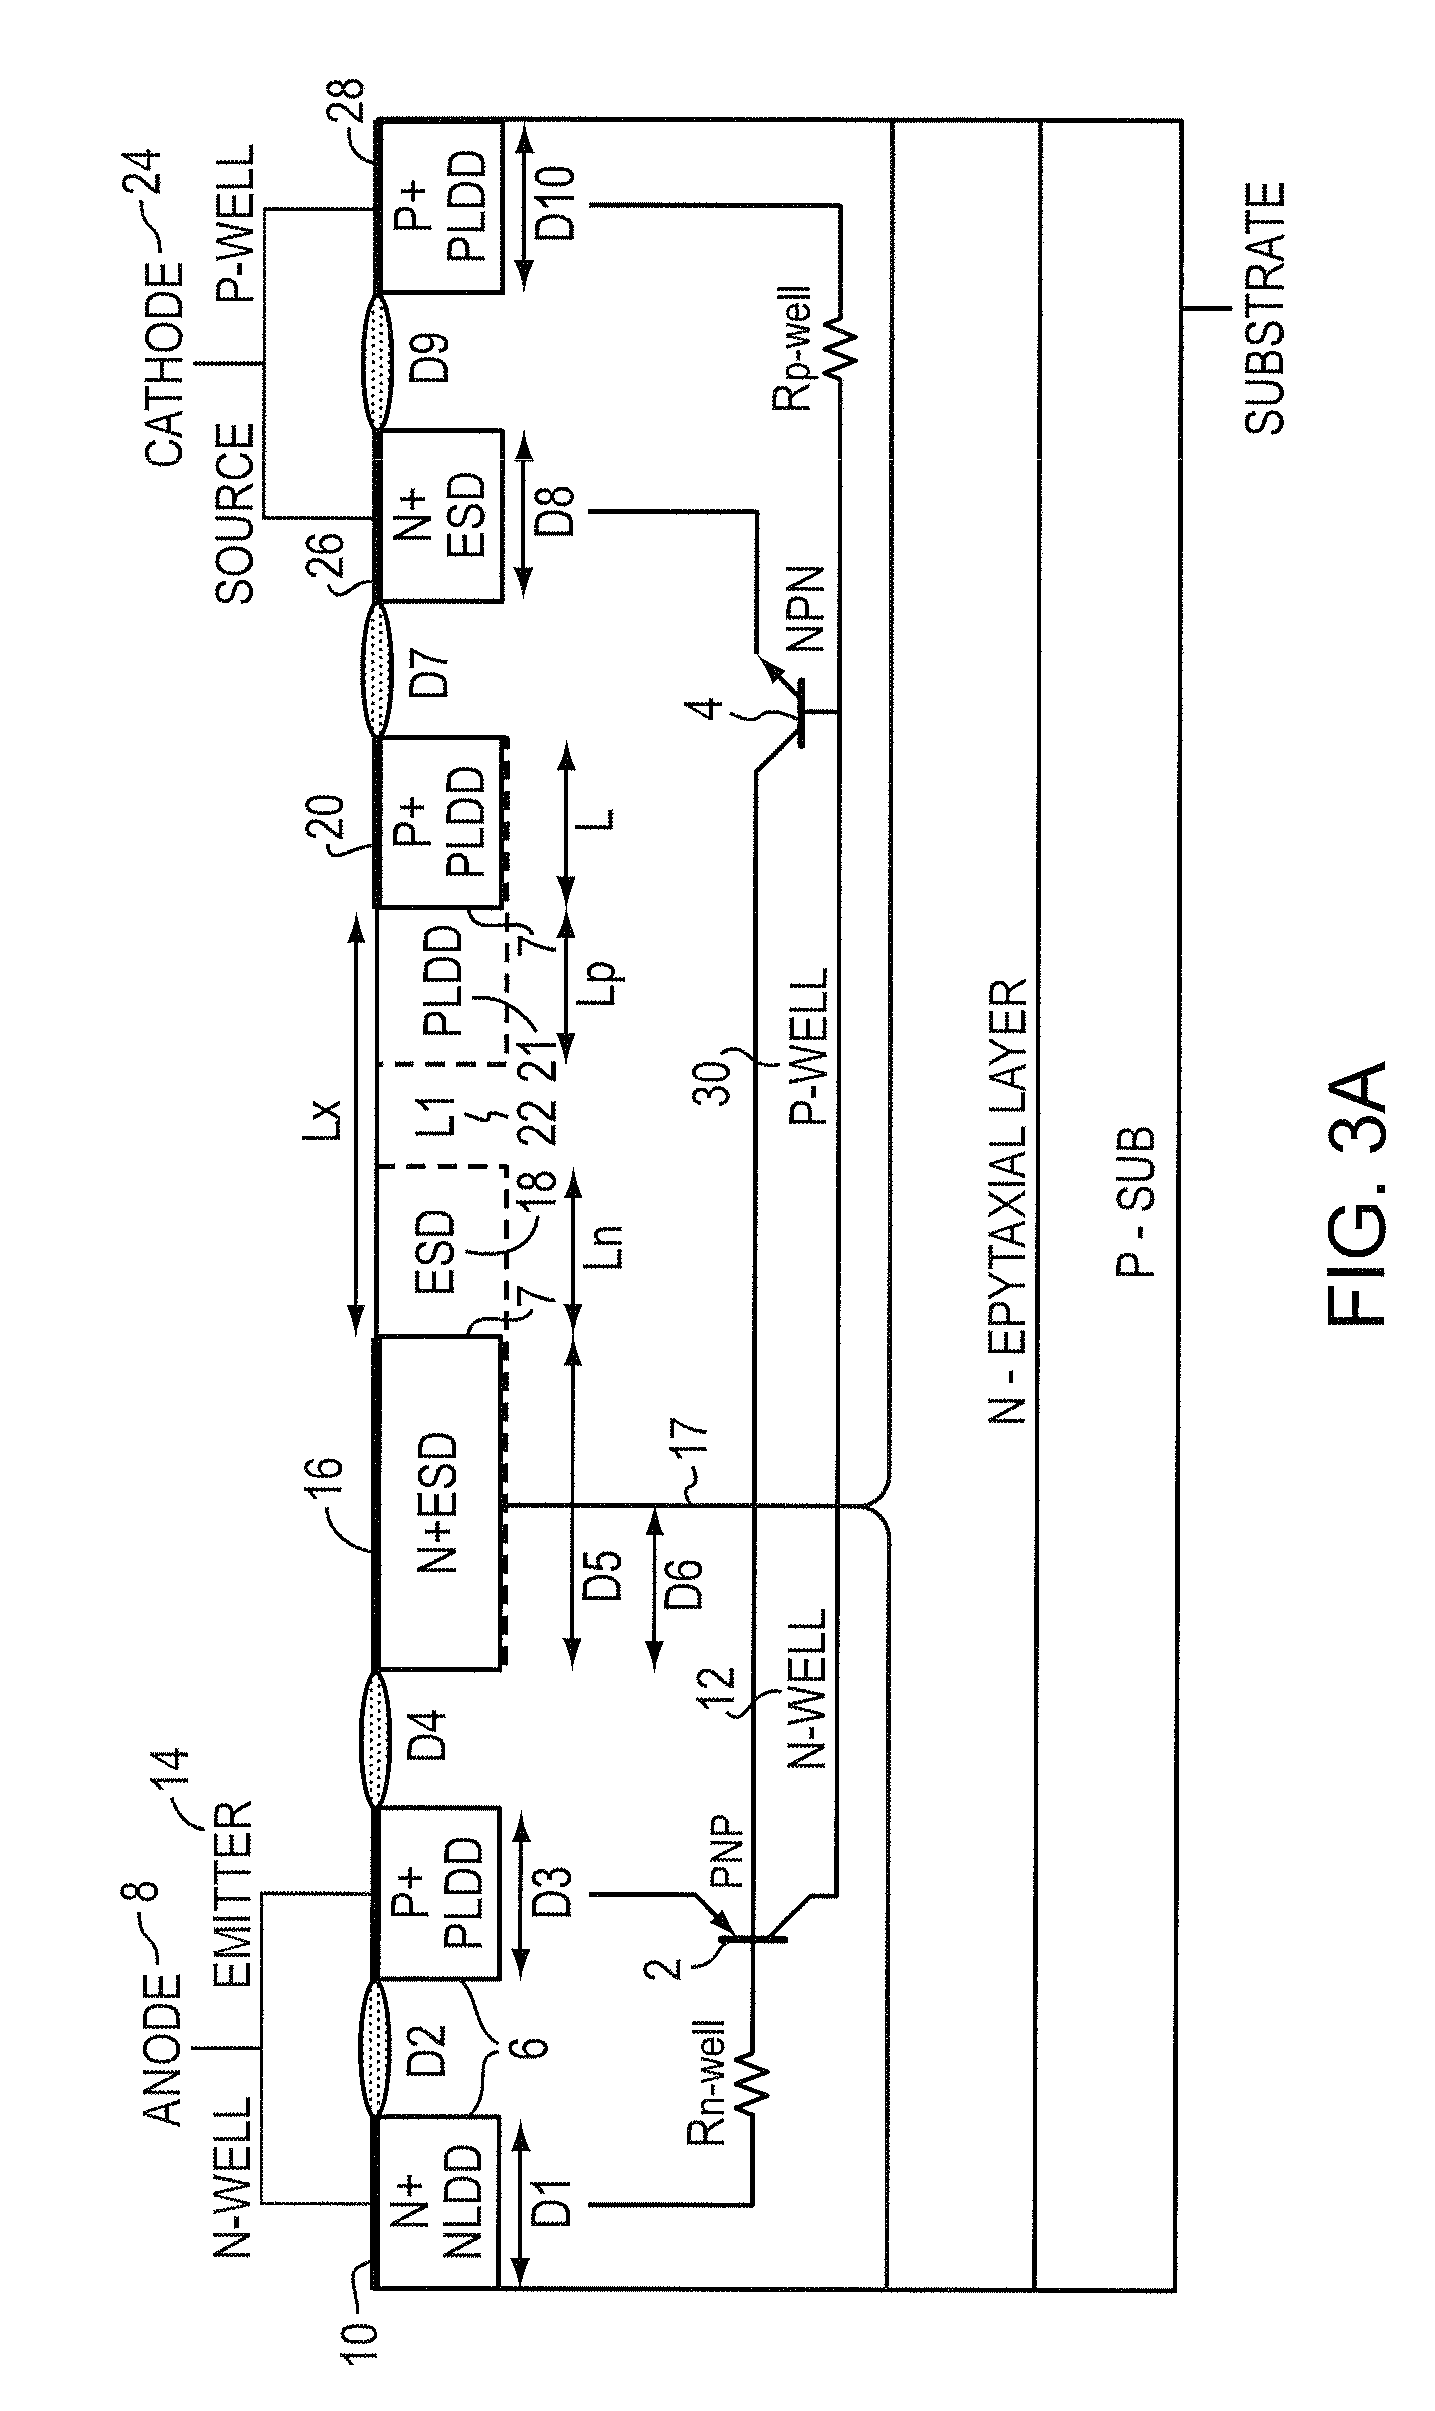 Un-assisted, low-trigger and high-holding voltage scr